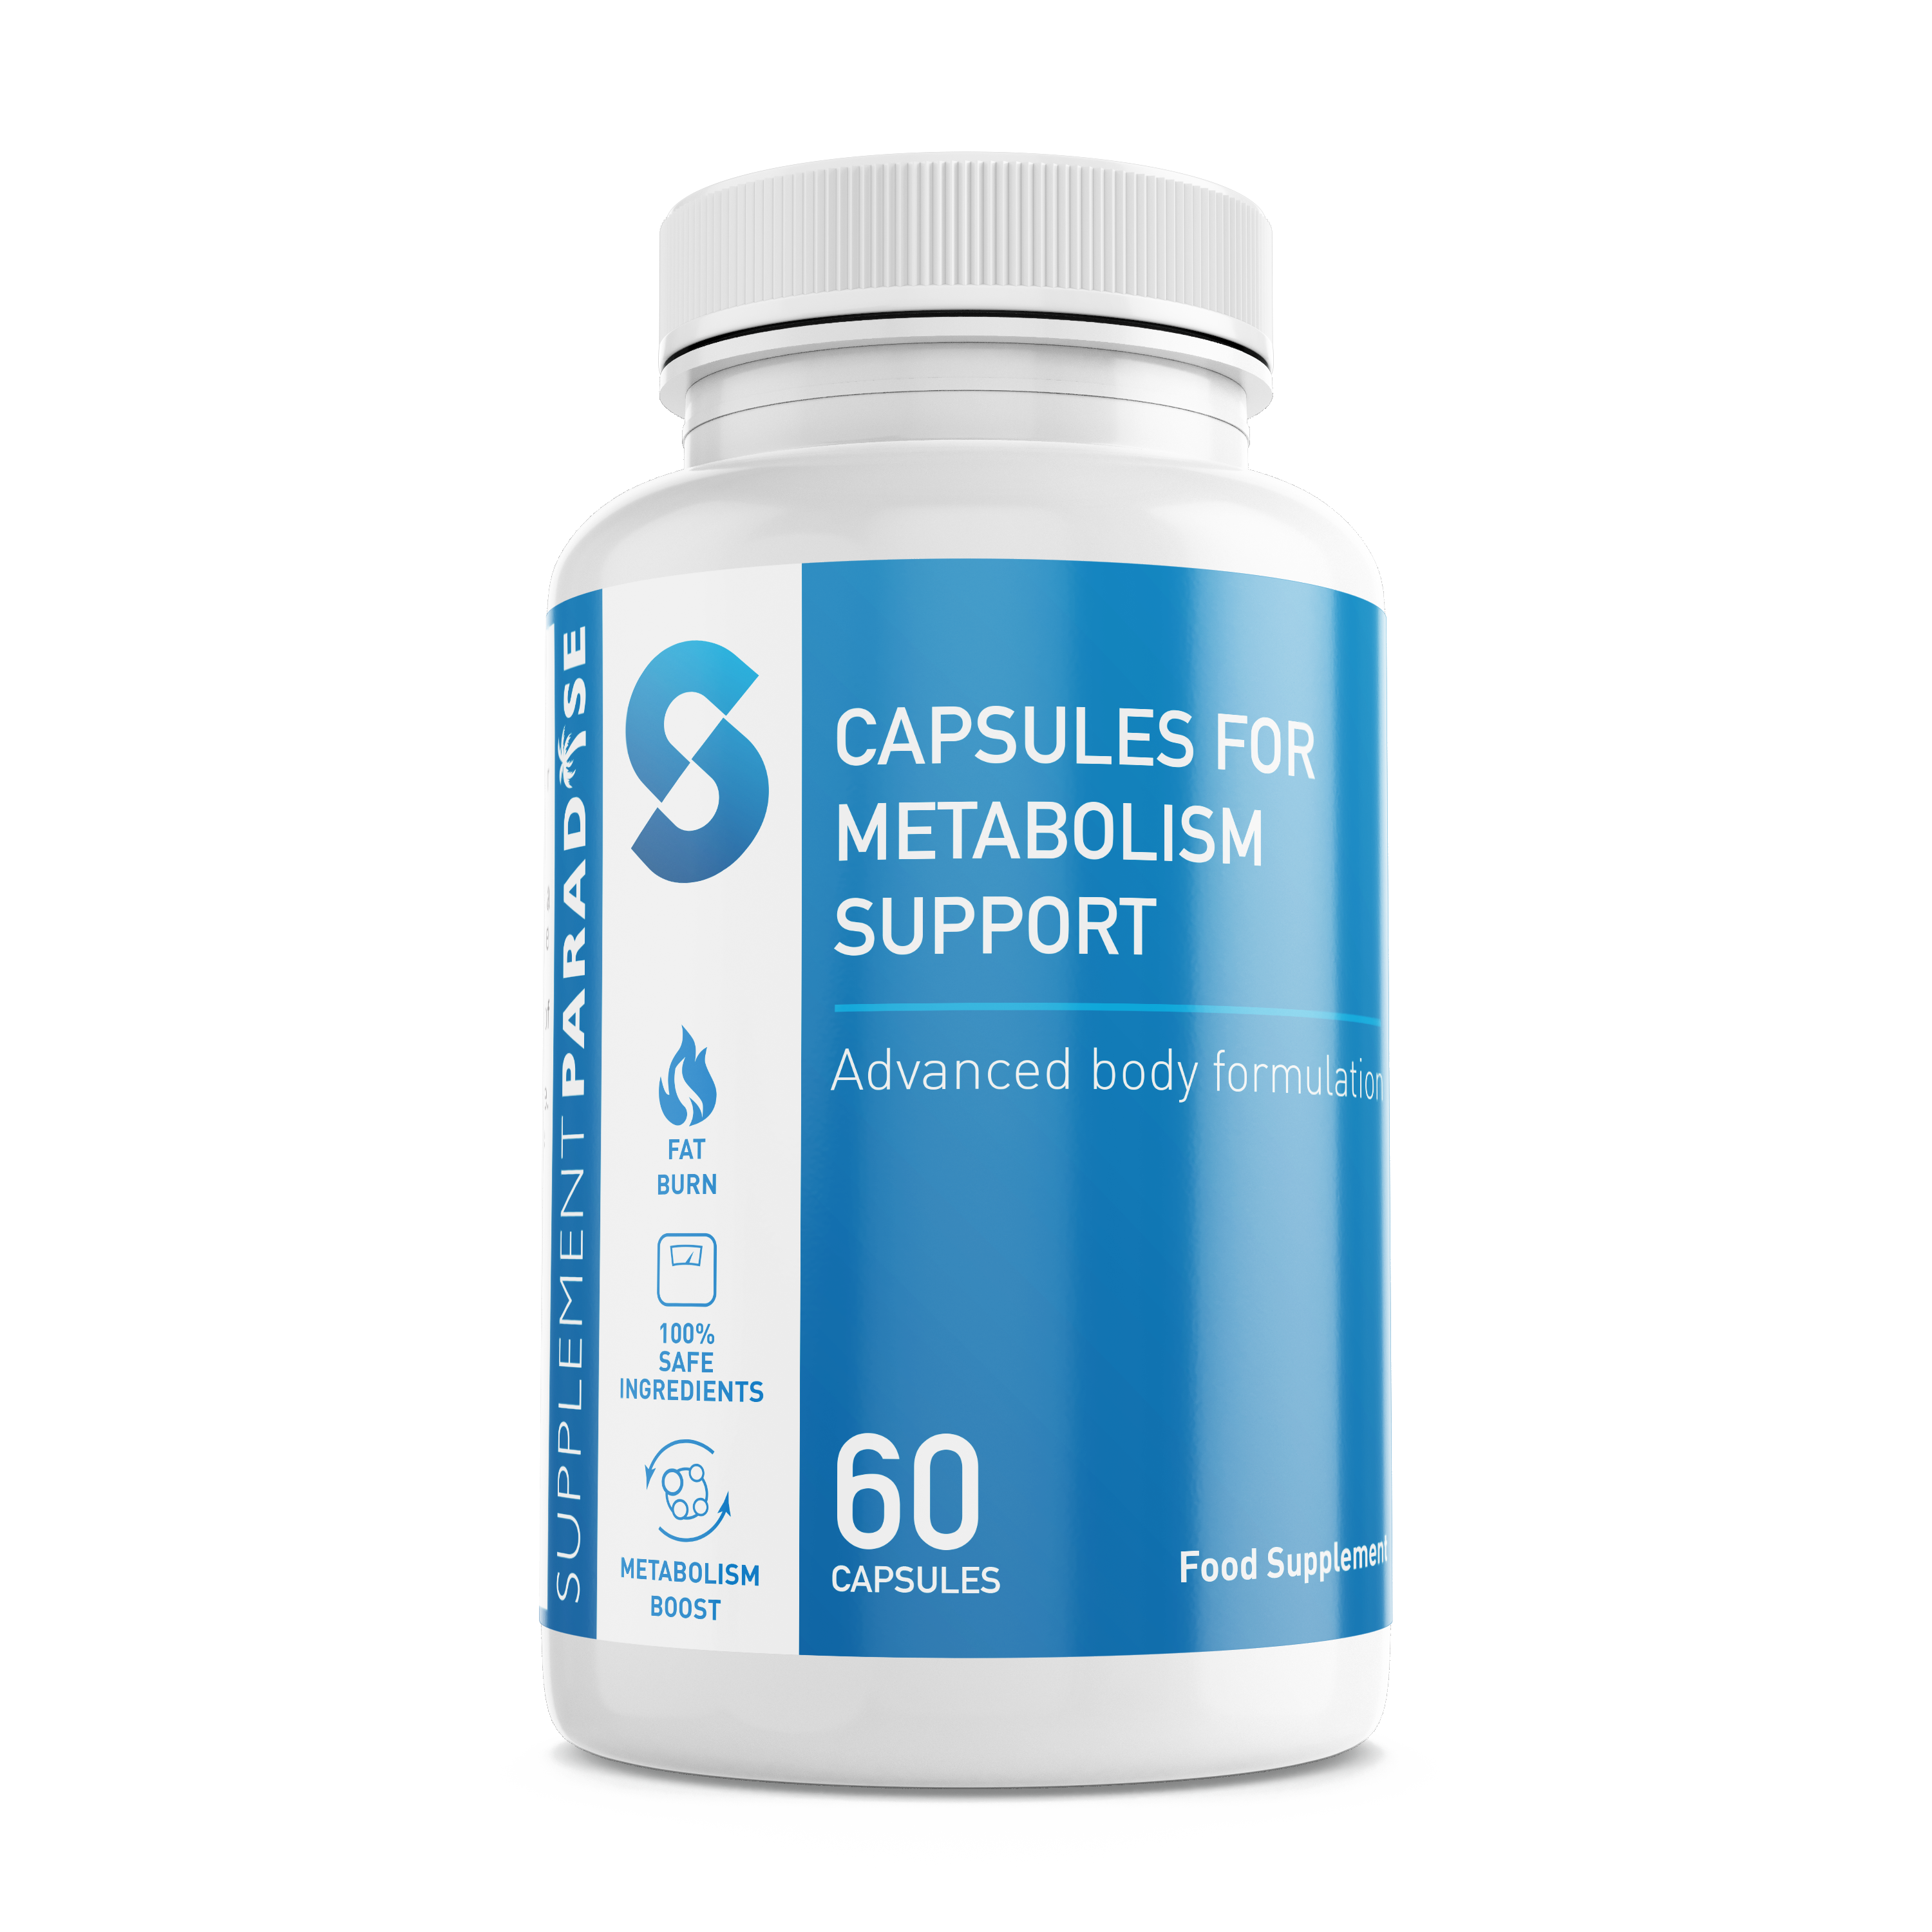 Style Capsules for Metabolism Support